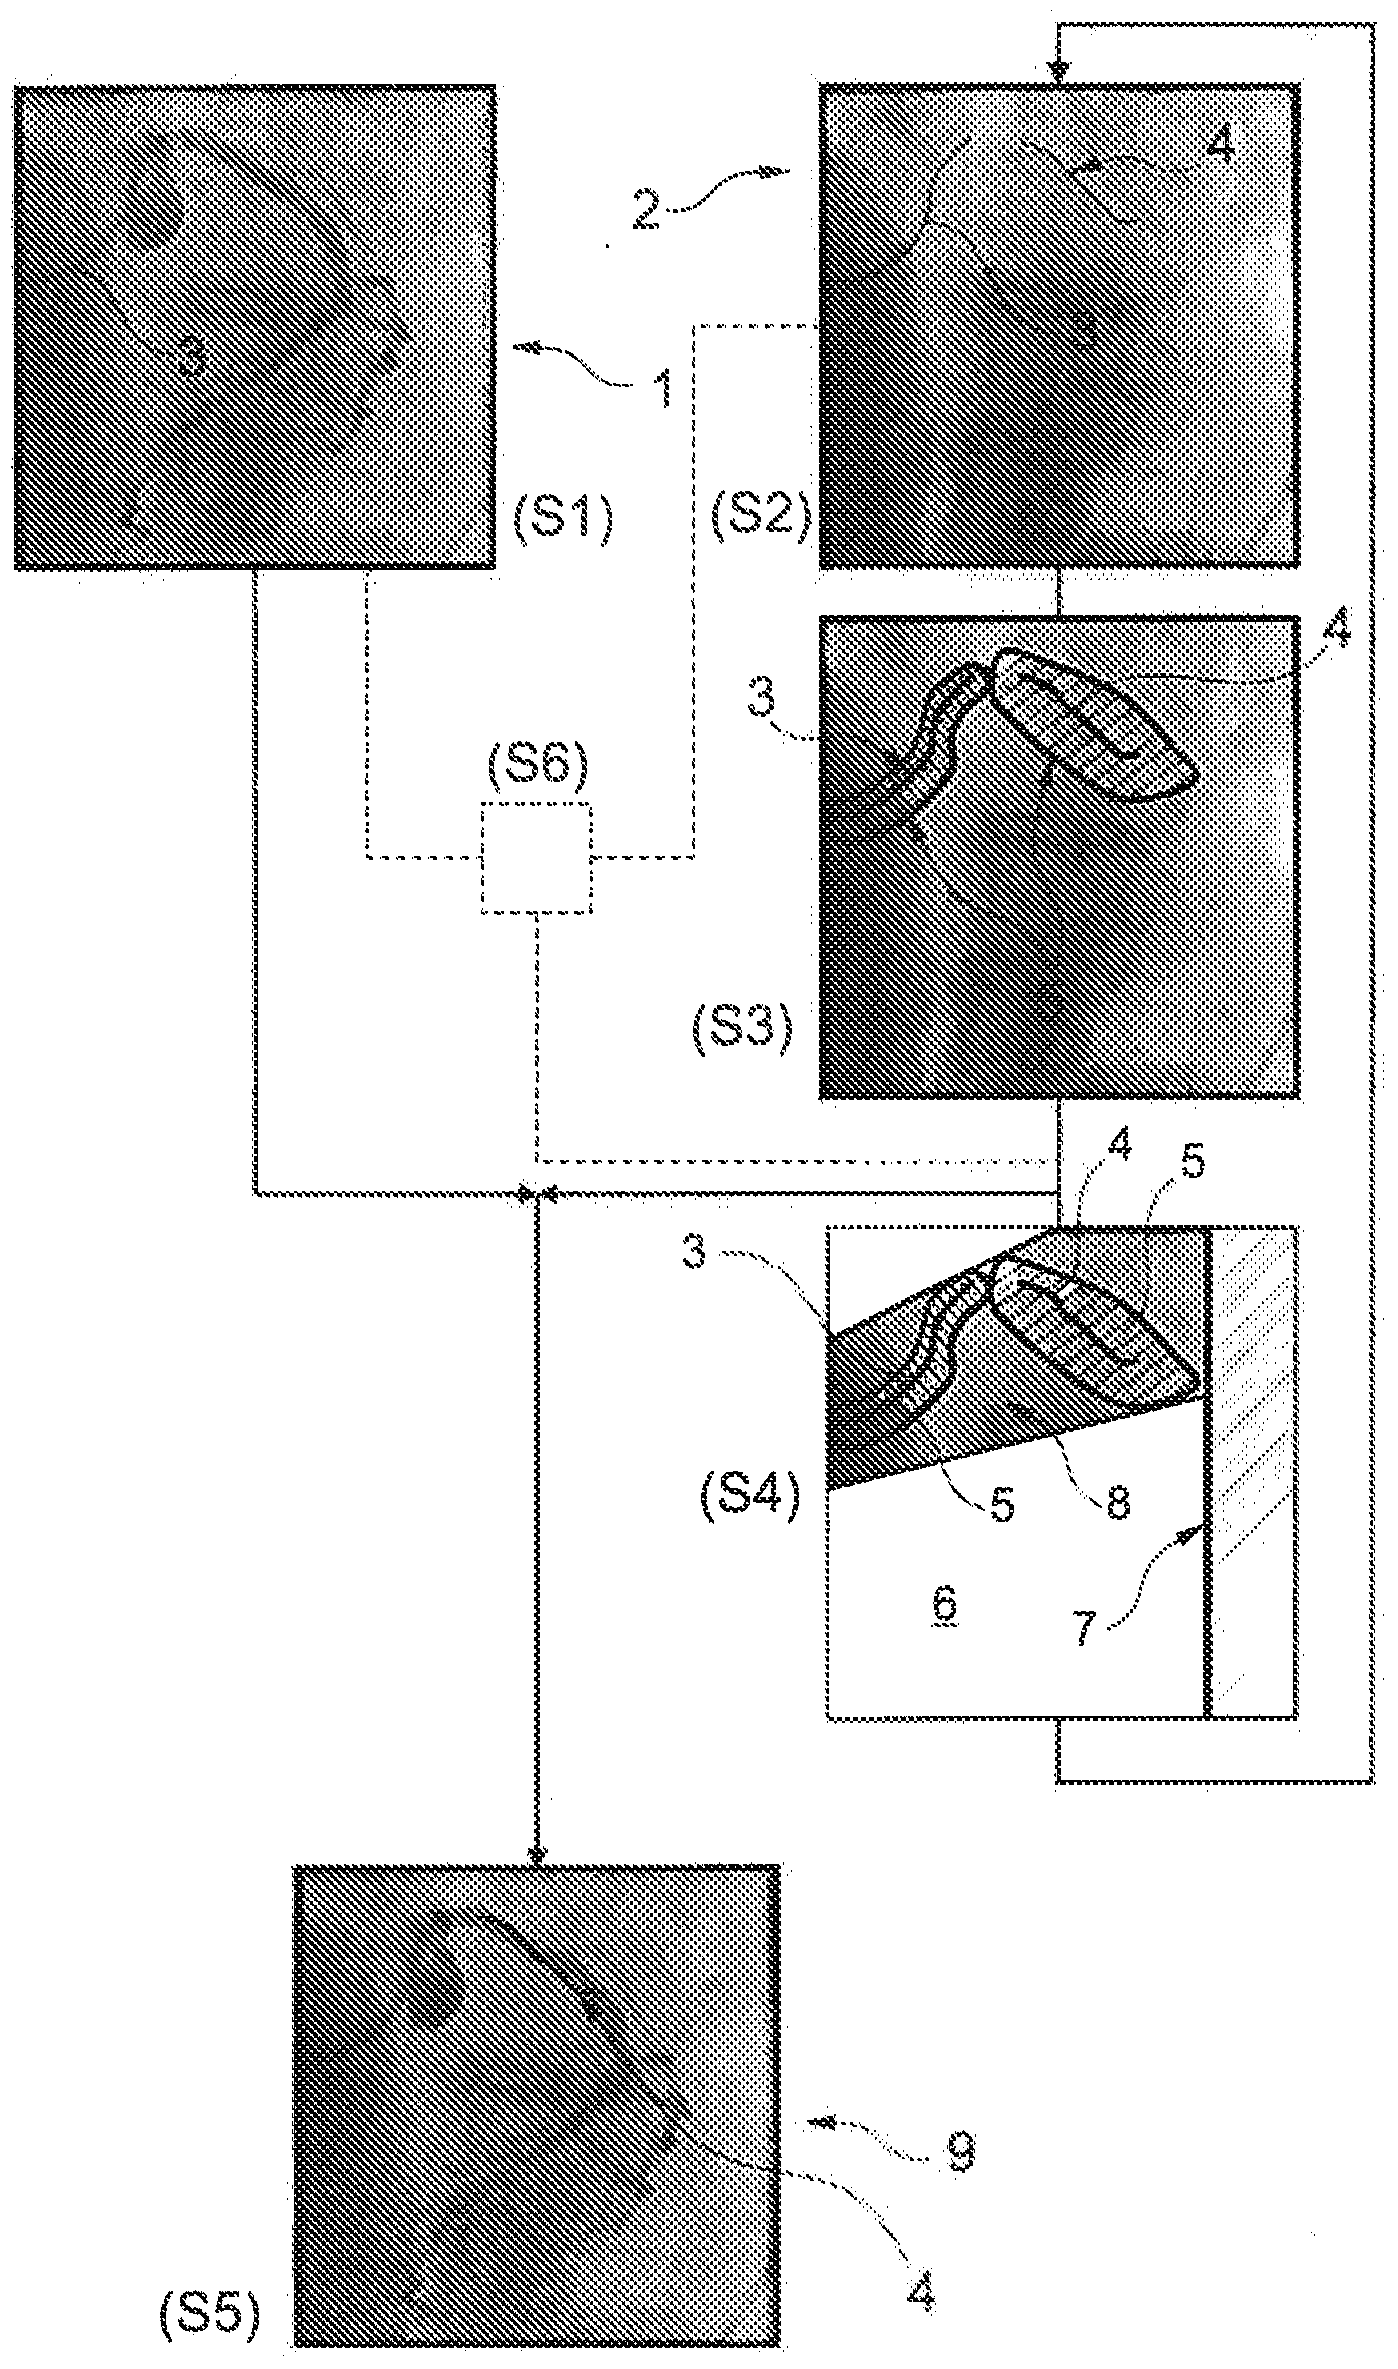 Medical imaging device for providing image representation supporting in positioning intervention device